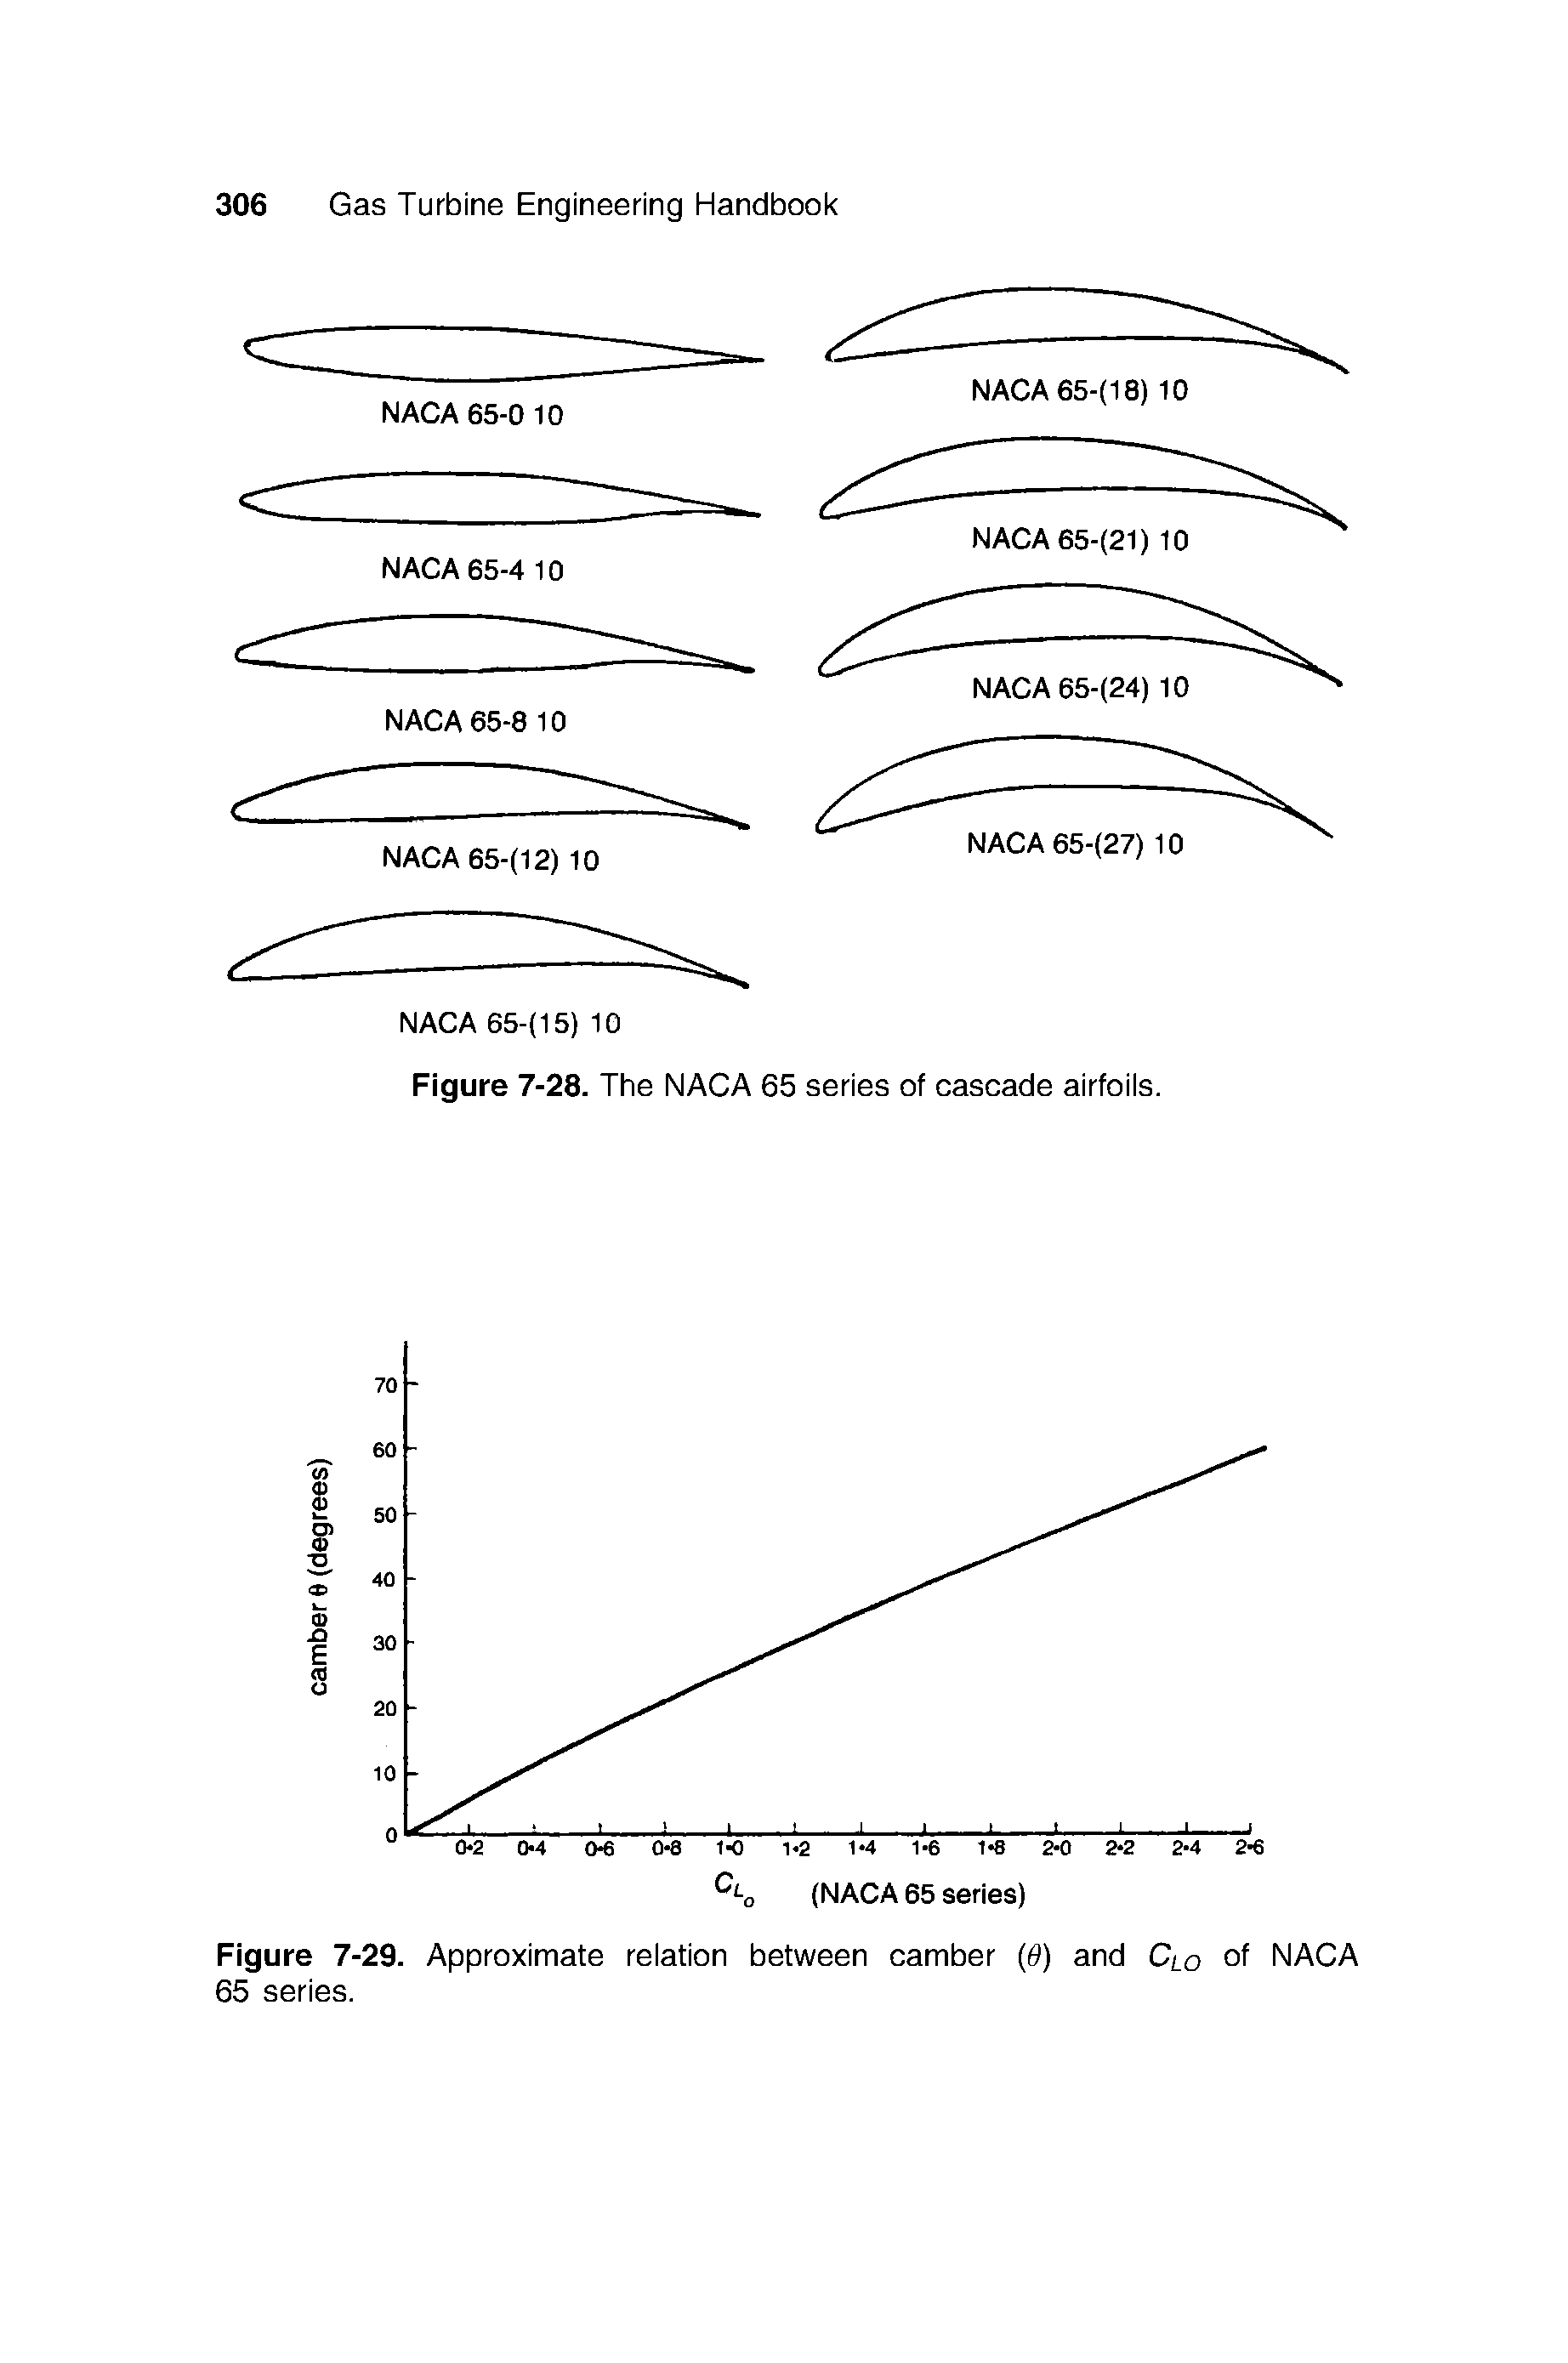 Figure 7-29. Approximate reiation between eamber (6) and Clo of NACA 65 series.